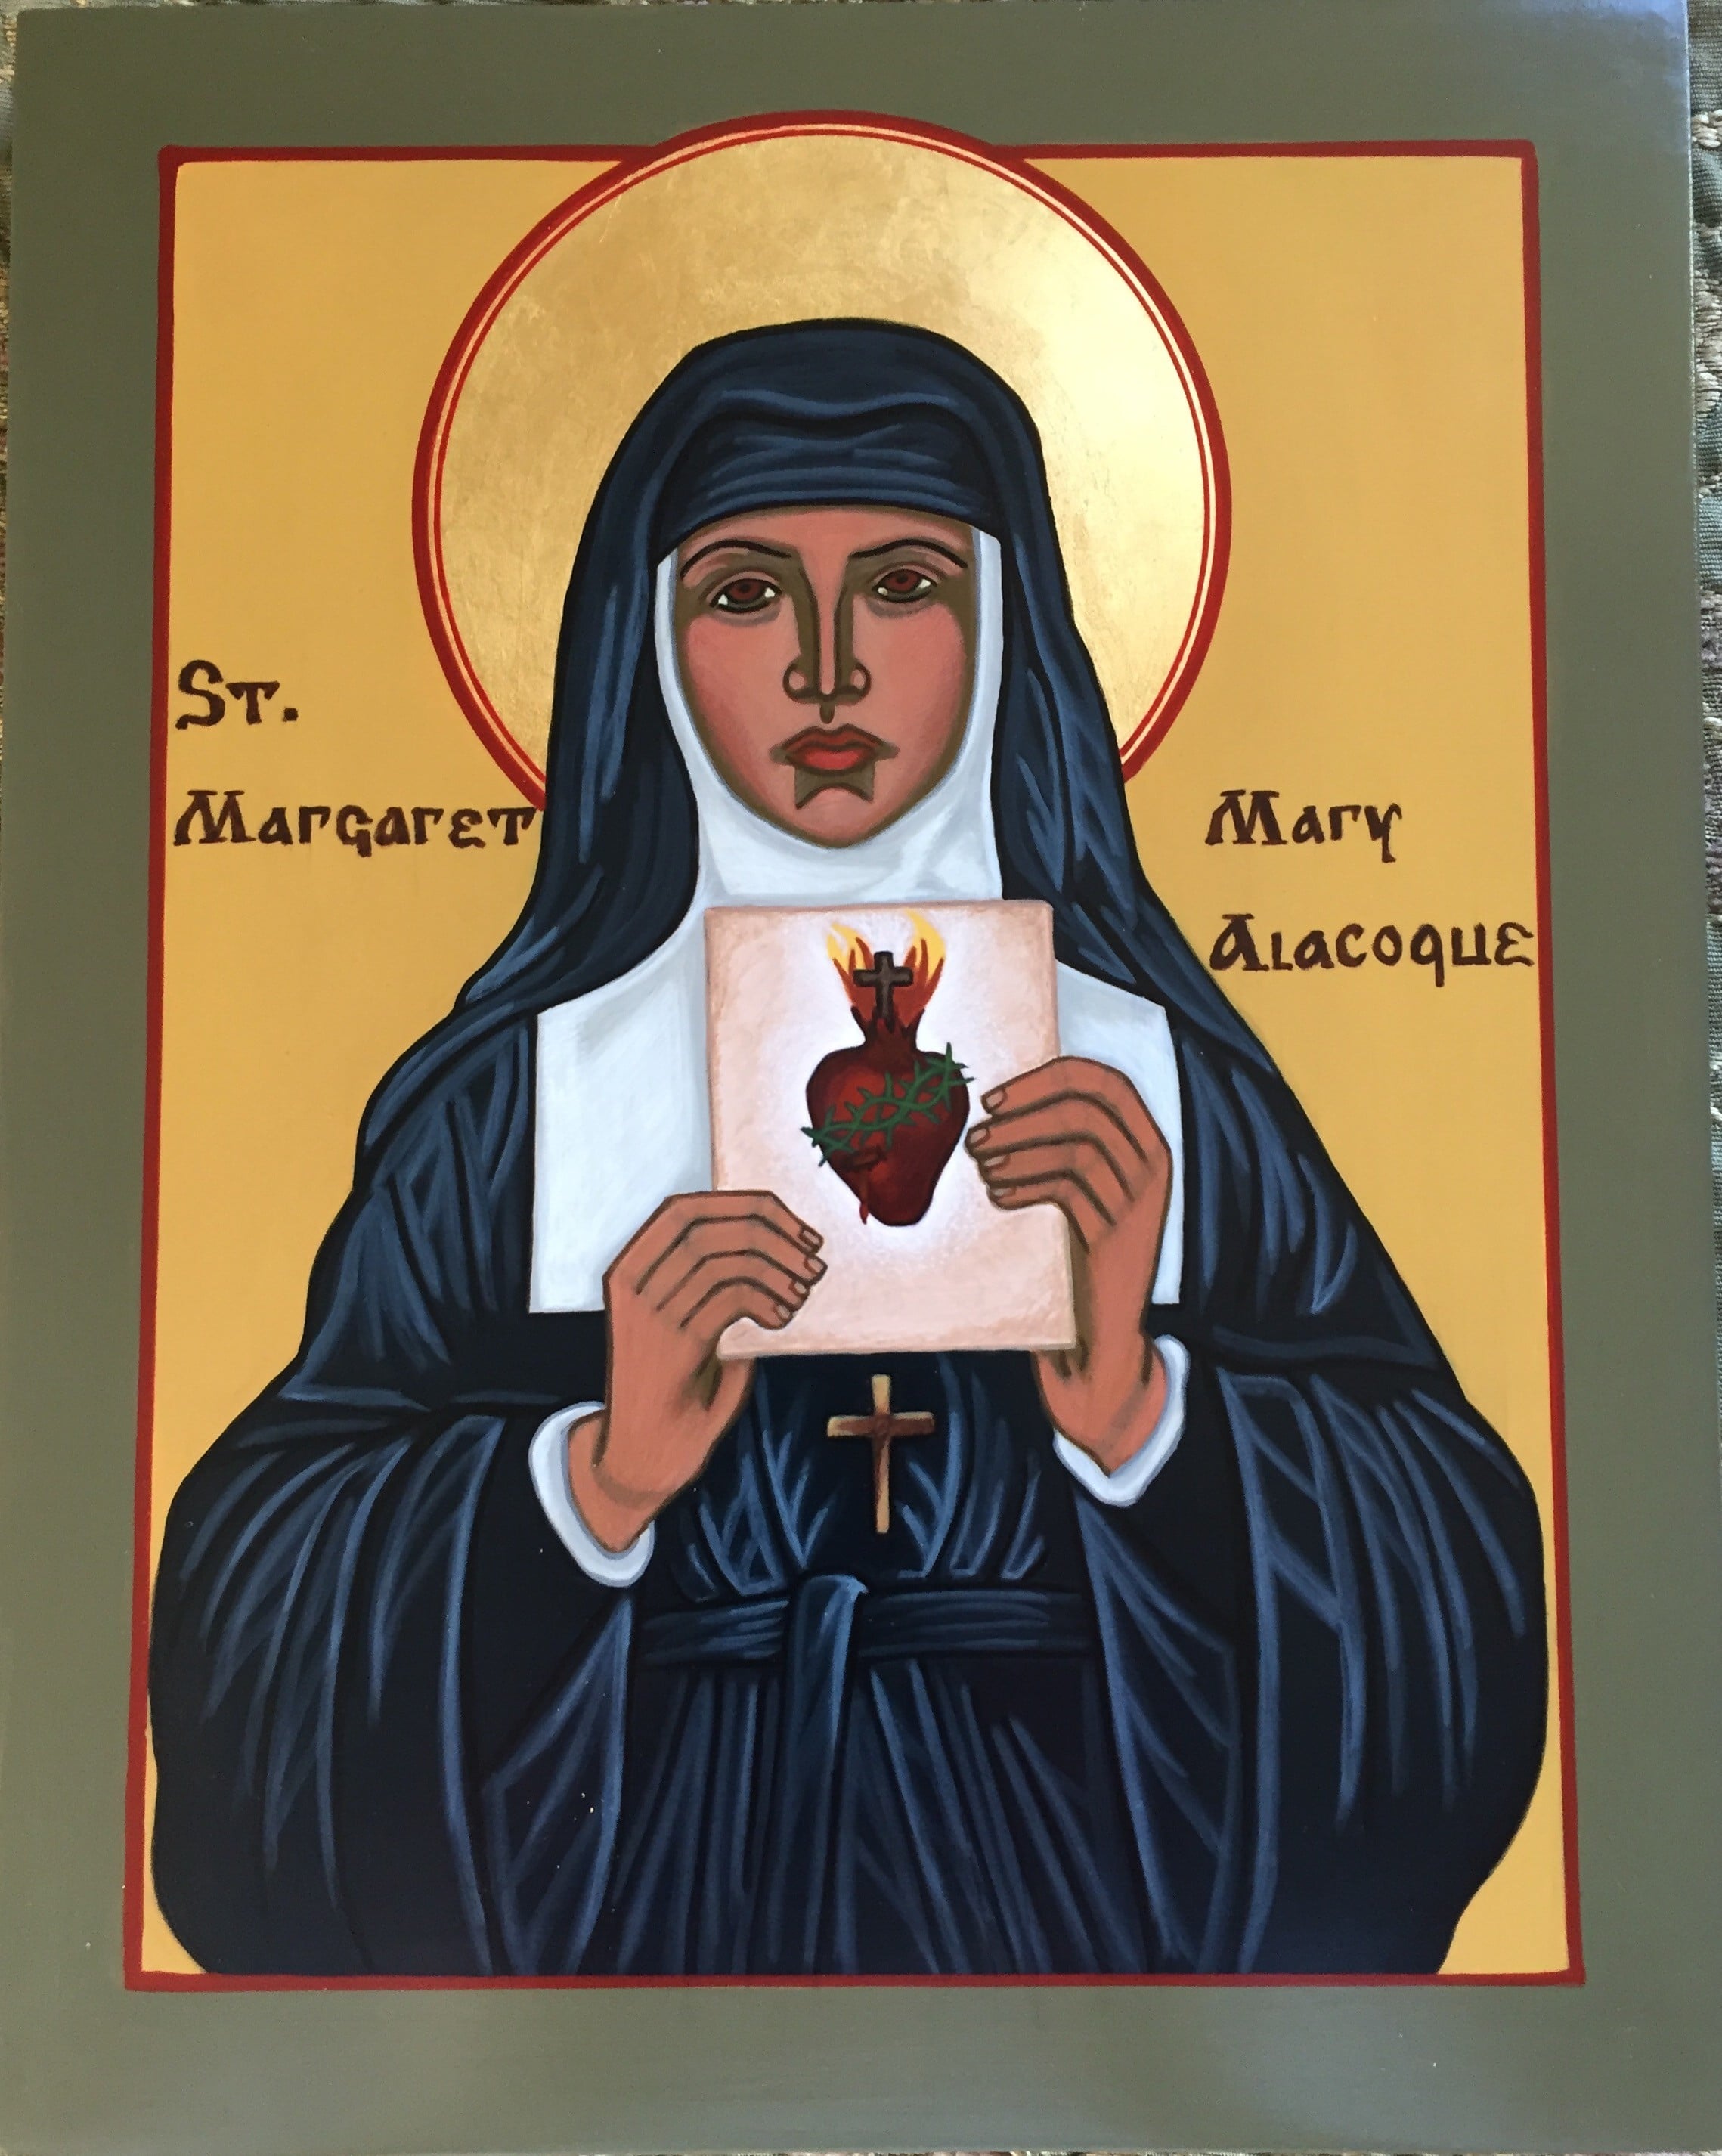 St. Margaret Mary Alocoque, patron of those suffering from polio, devotees of the Sacred Heart, loss of parents.  Feast day October 16